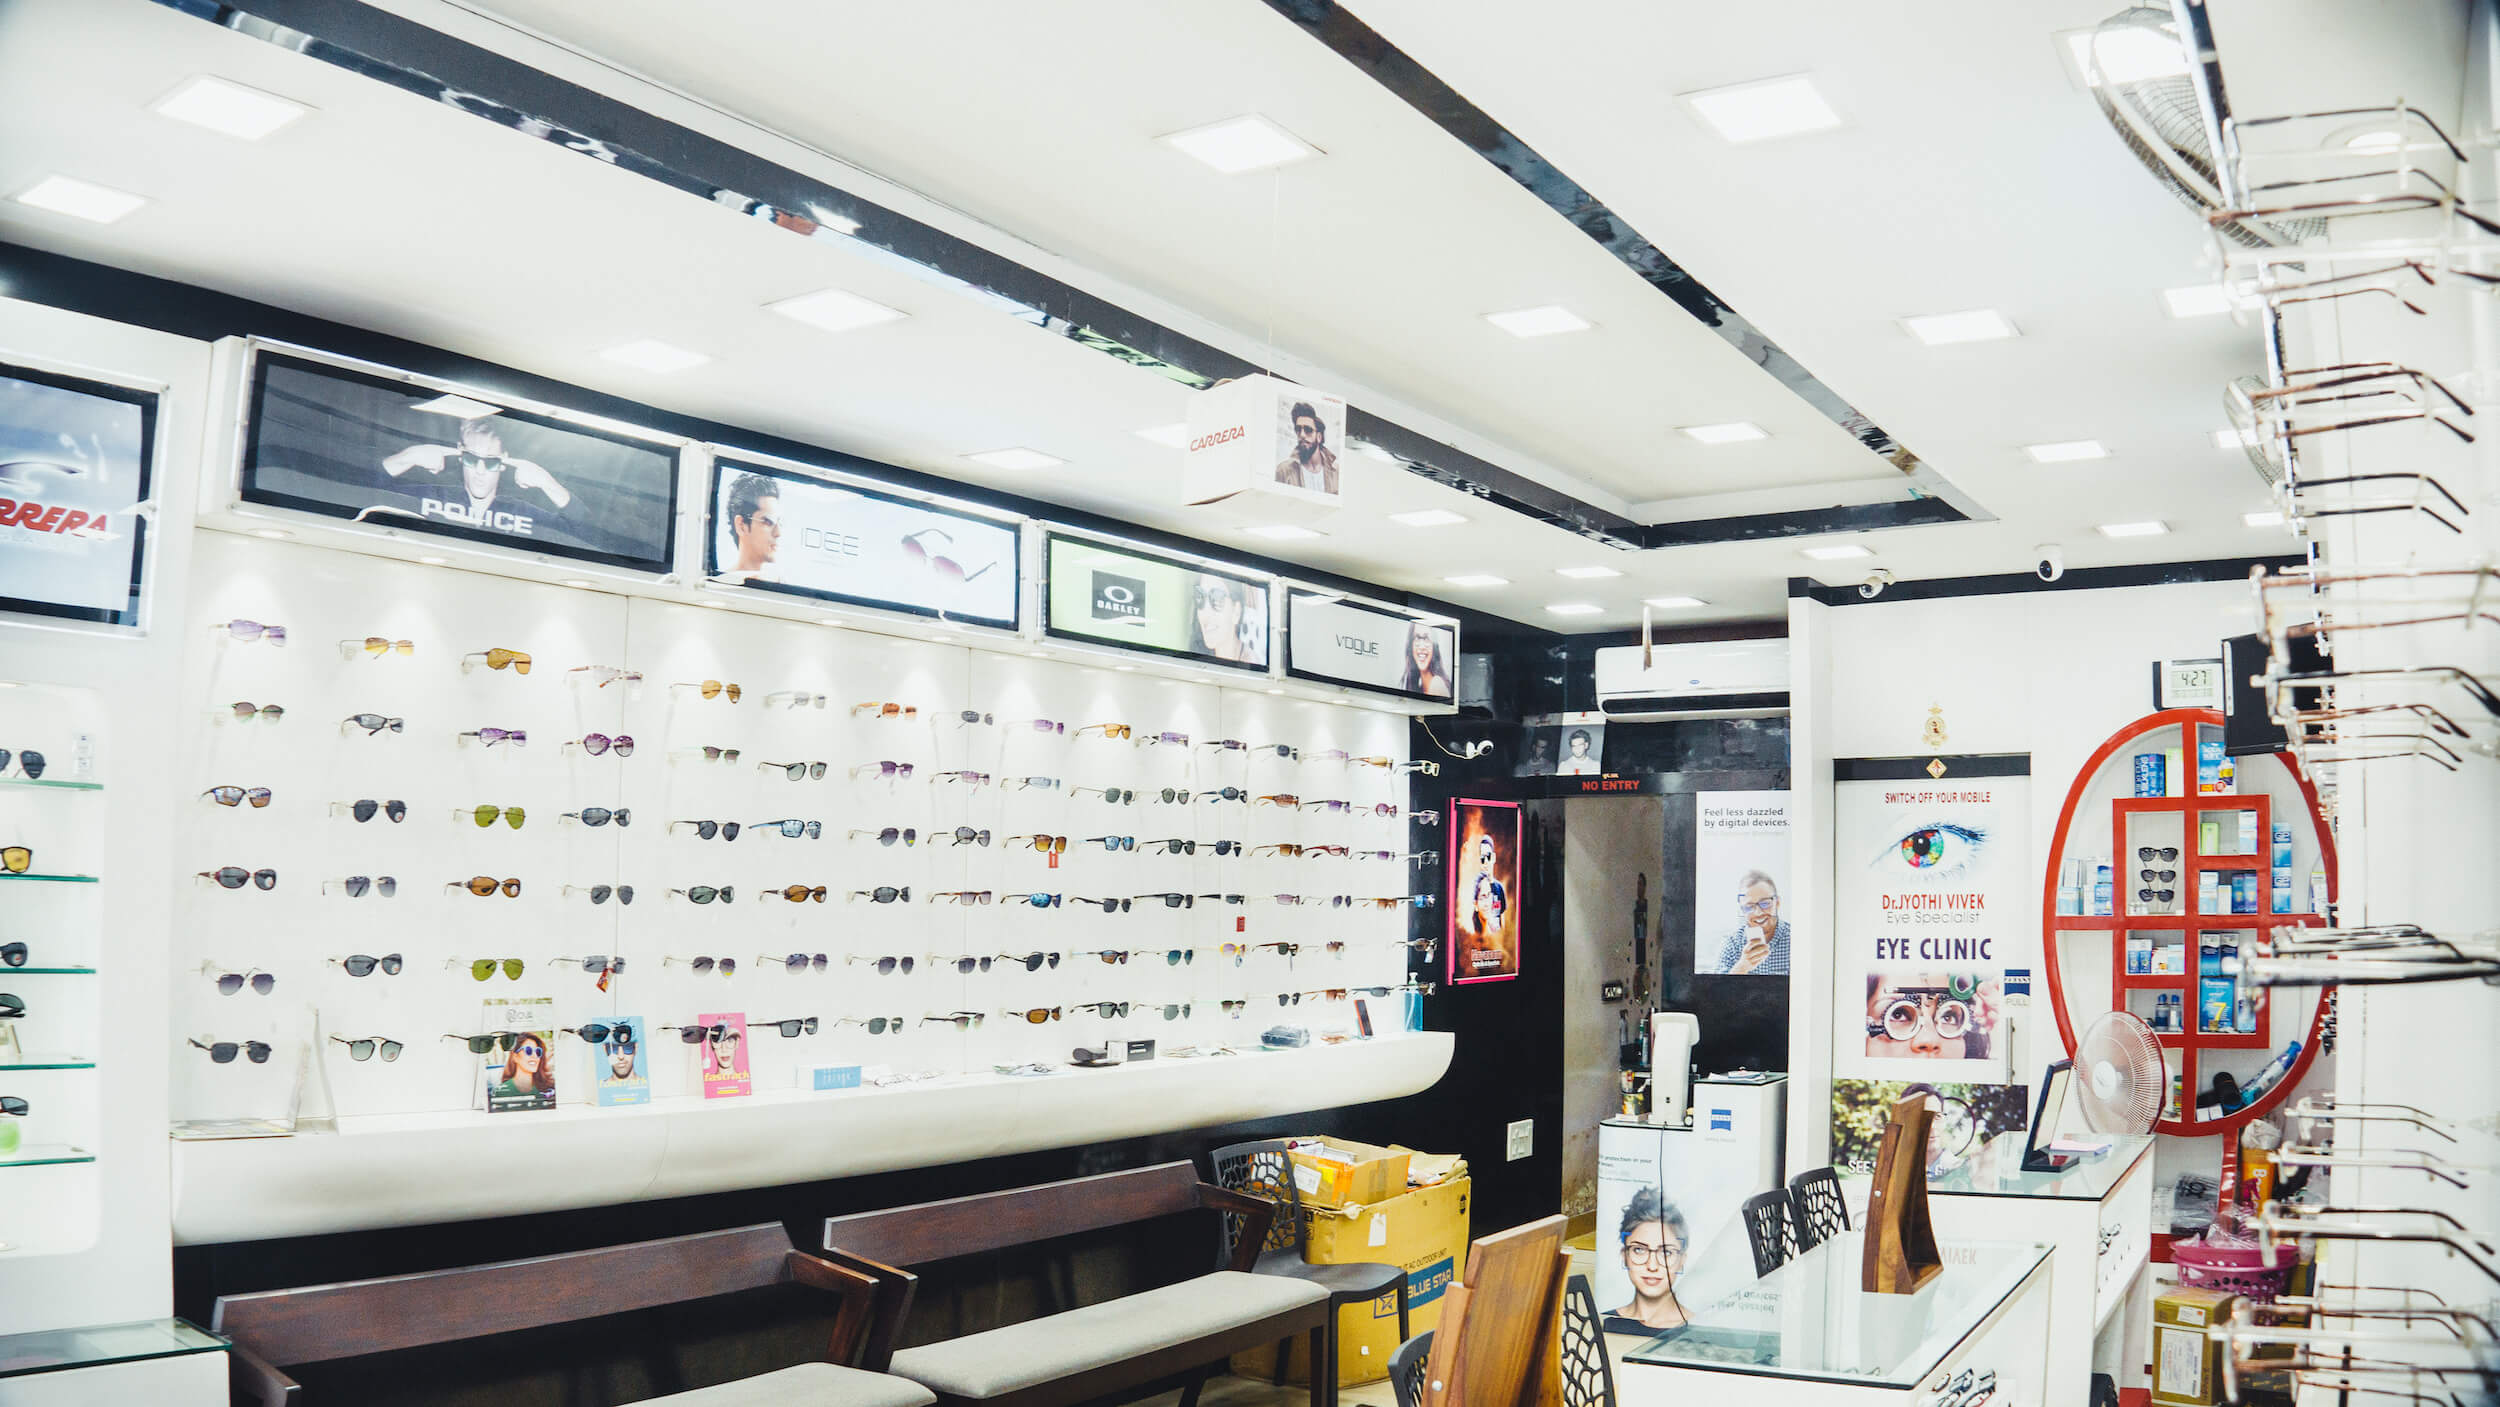 Ray-Ban Store In India